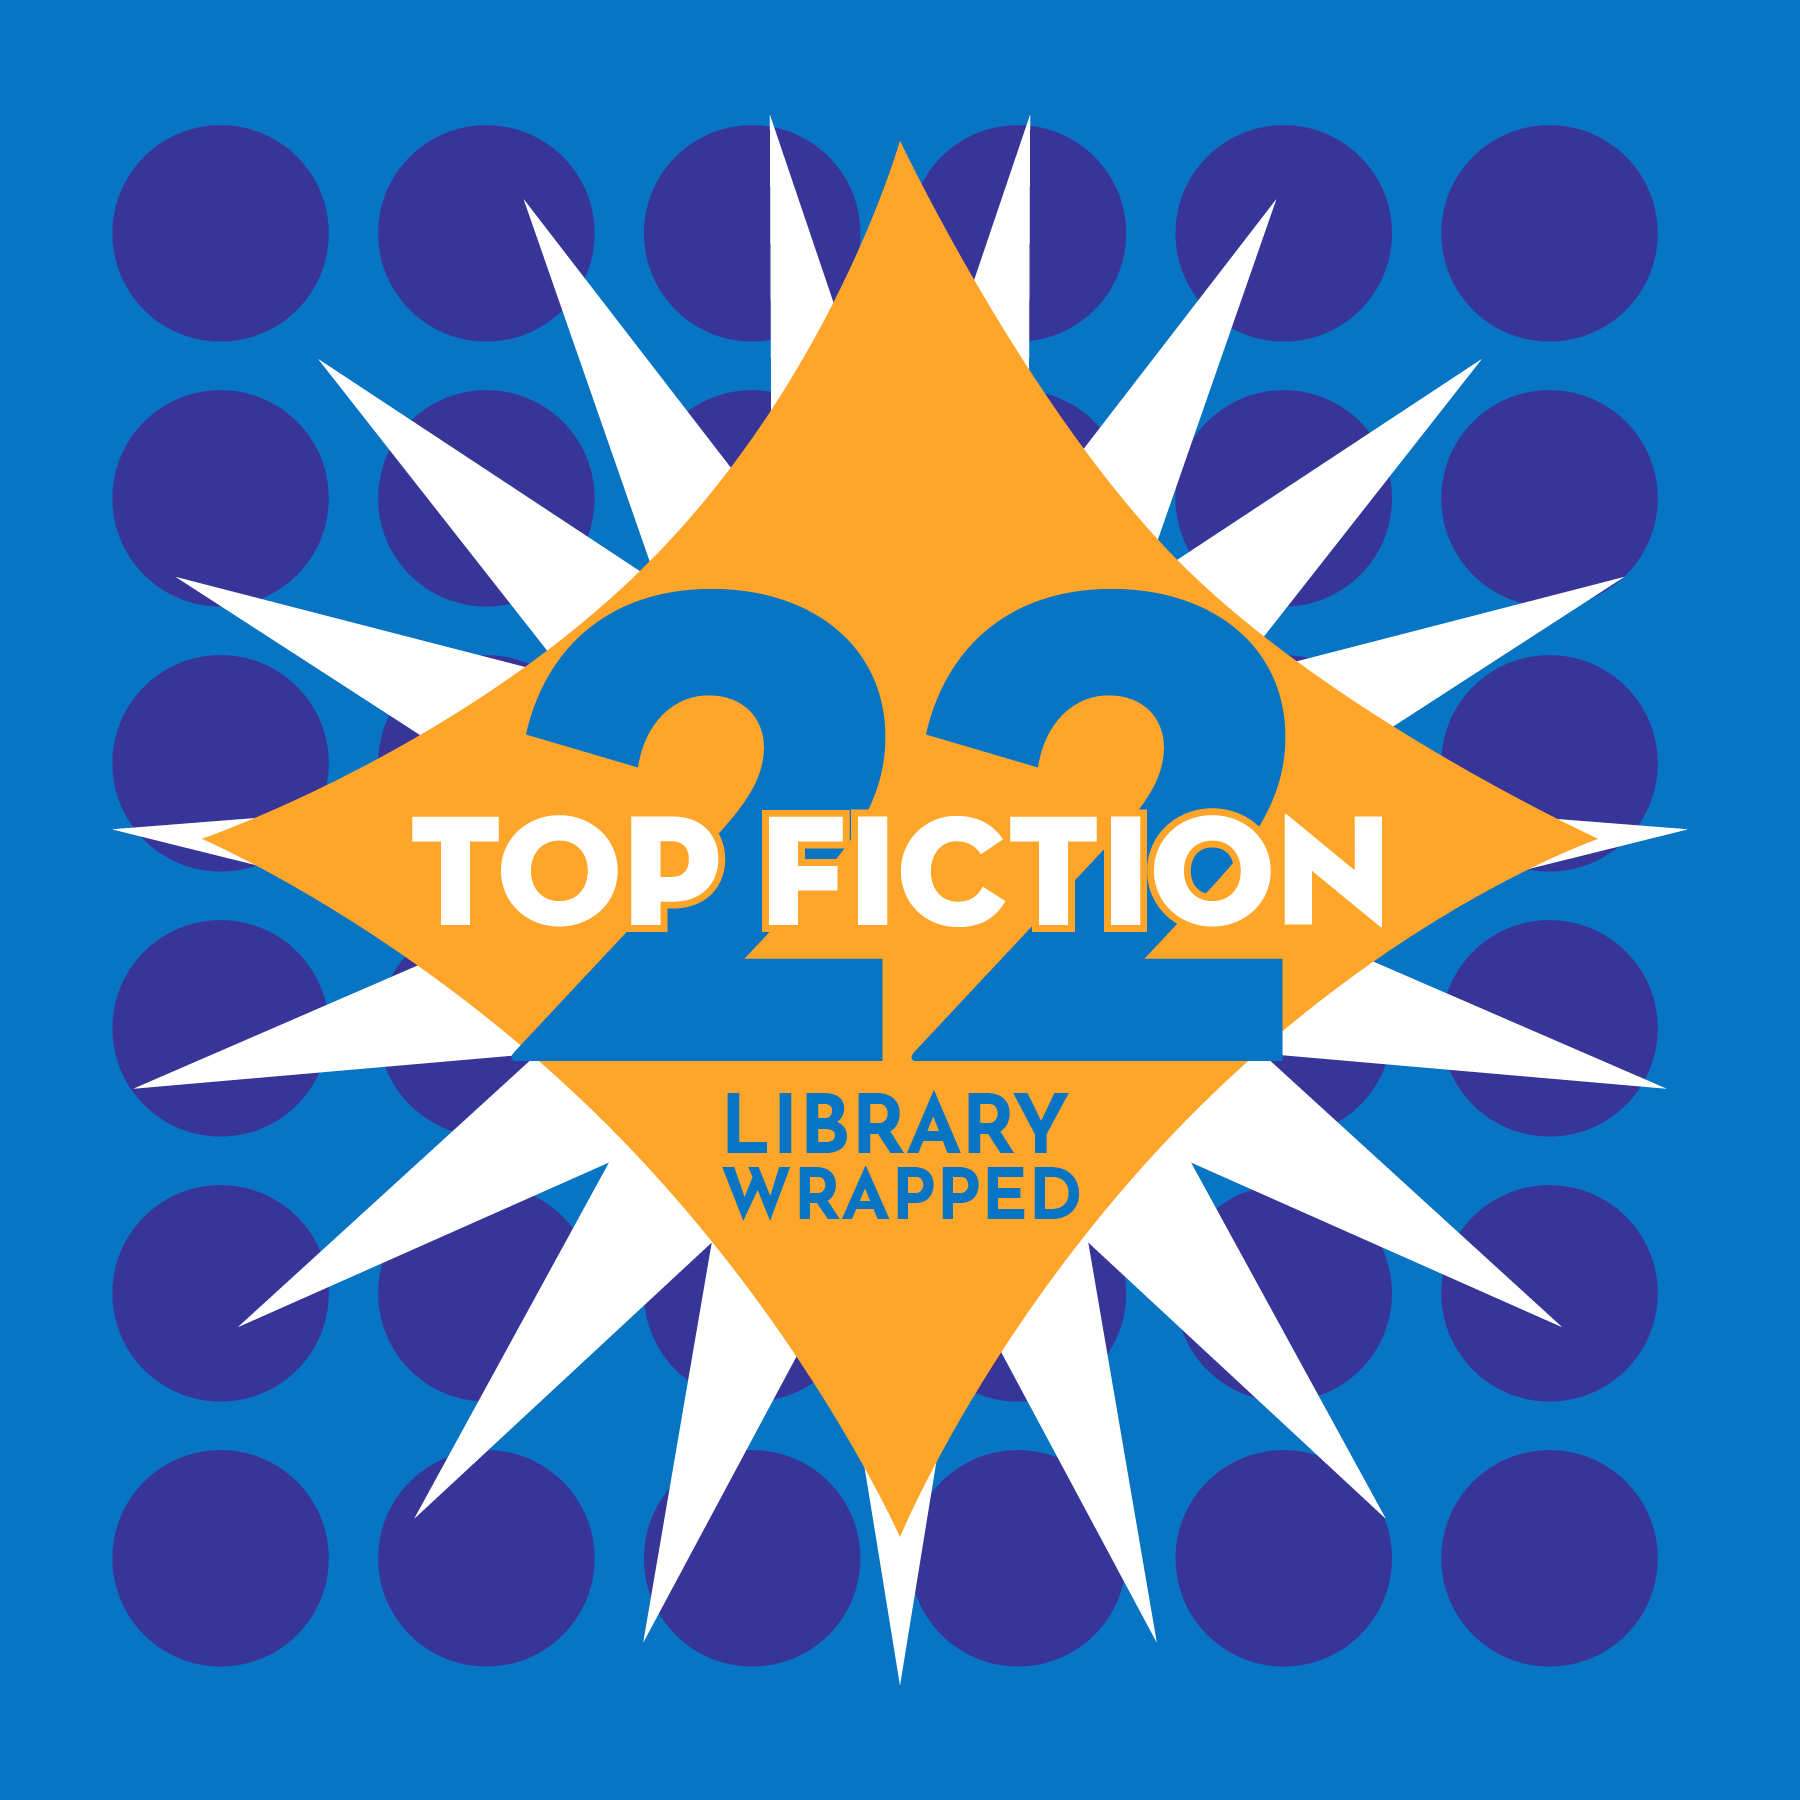 A graphic says 22 Library Wrapped Top Fiction over a blue background.